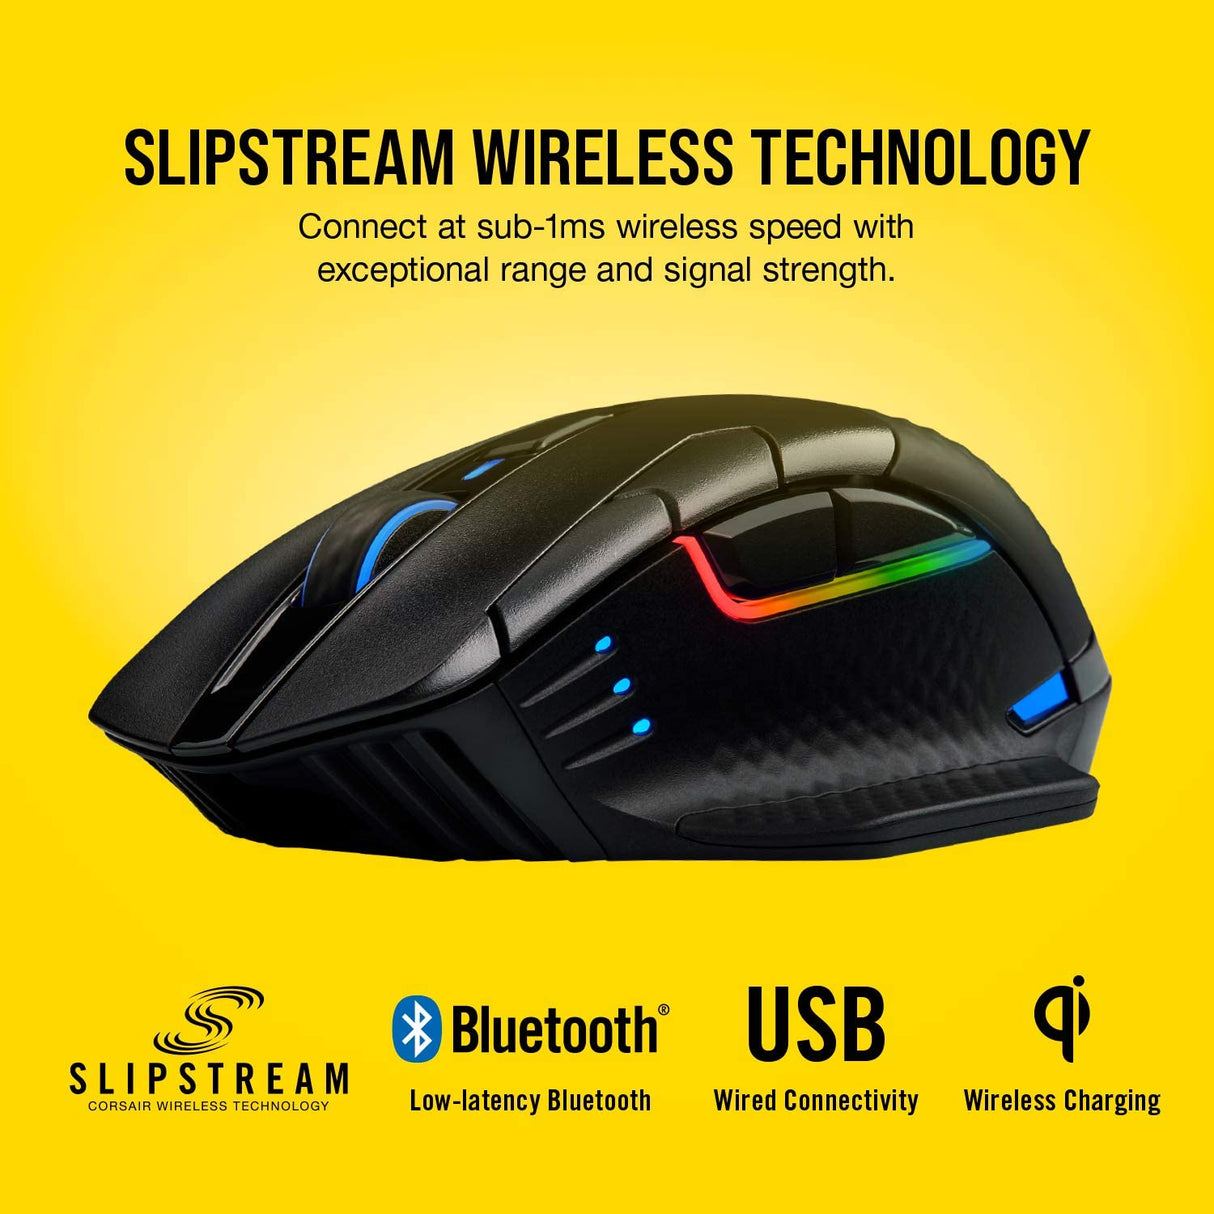 Corsair Dark Core RGB Pro SE, Wireless FPS/MOBA Gaming Mouse with Slipstream Technology, Black, Backlit RGB LED, 18000 DPI, Optical, Qi Wireless Charging Certified